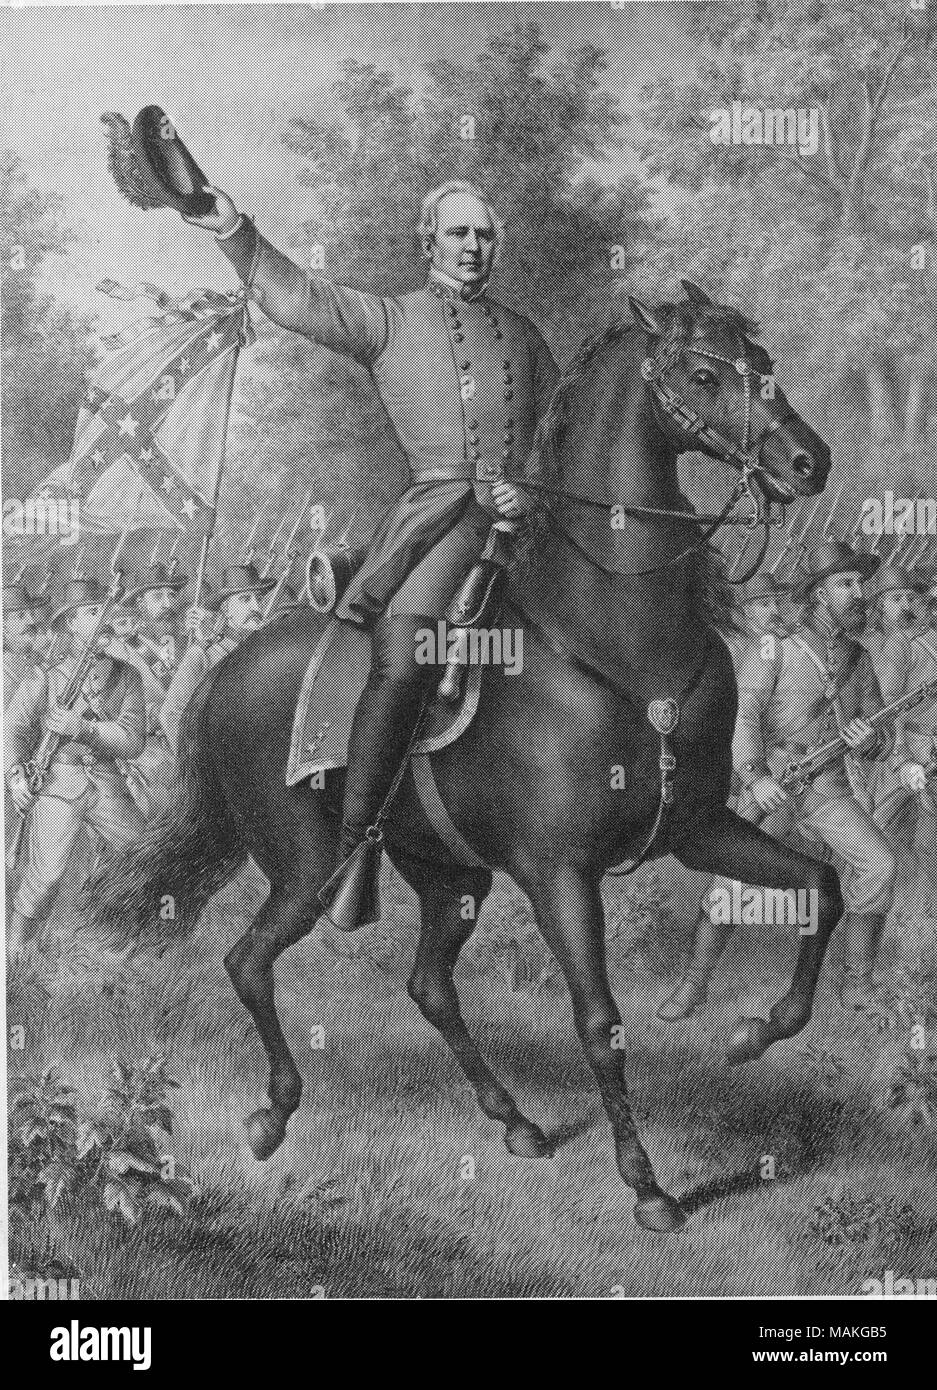 Print of Maj. Gen. Sterling Price on a horse in front of troops. Behind him a soldier is waving a Confederate flag. Title: Sterling Price, Major General (Confederate).  . between 1861 and 1865. Stock Photo